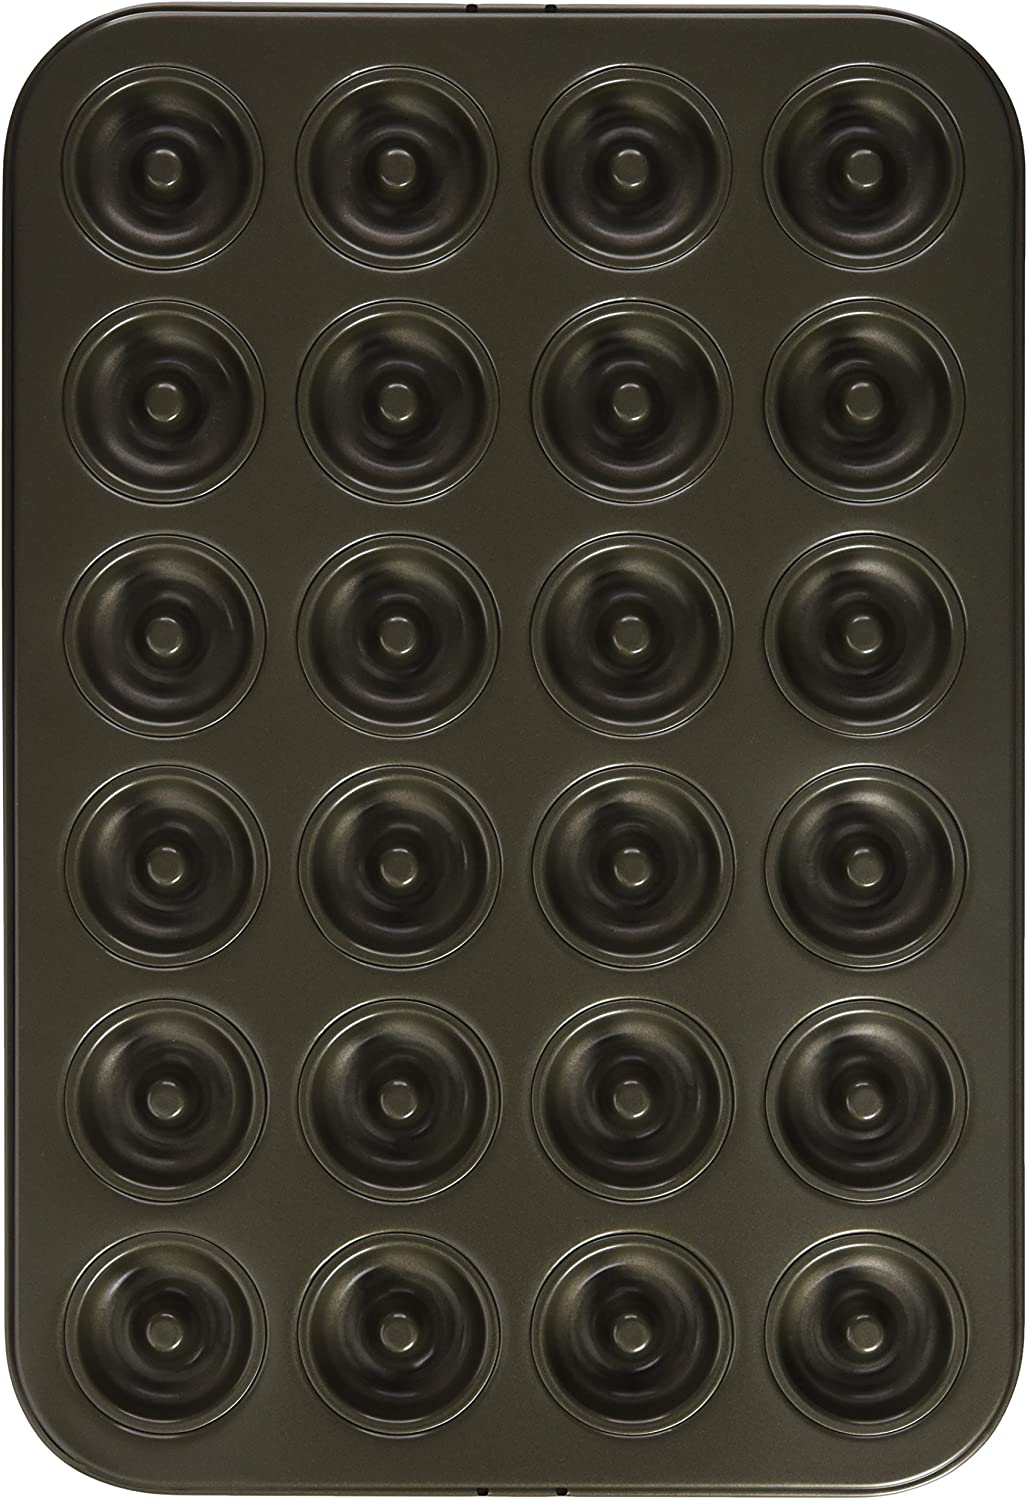 Staedter Mini Donut Baking Tray (x24 Donuts)